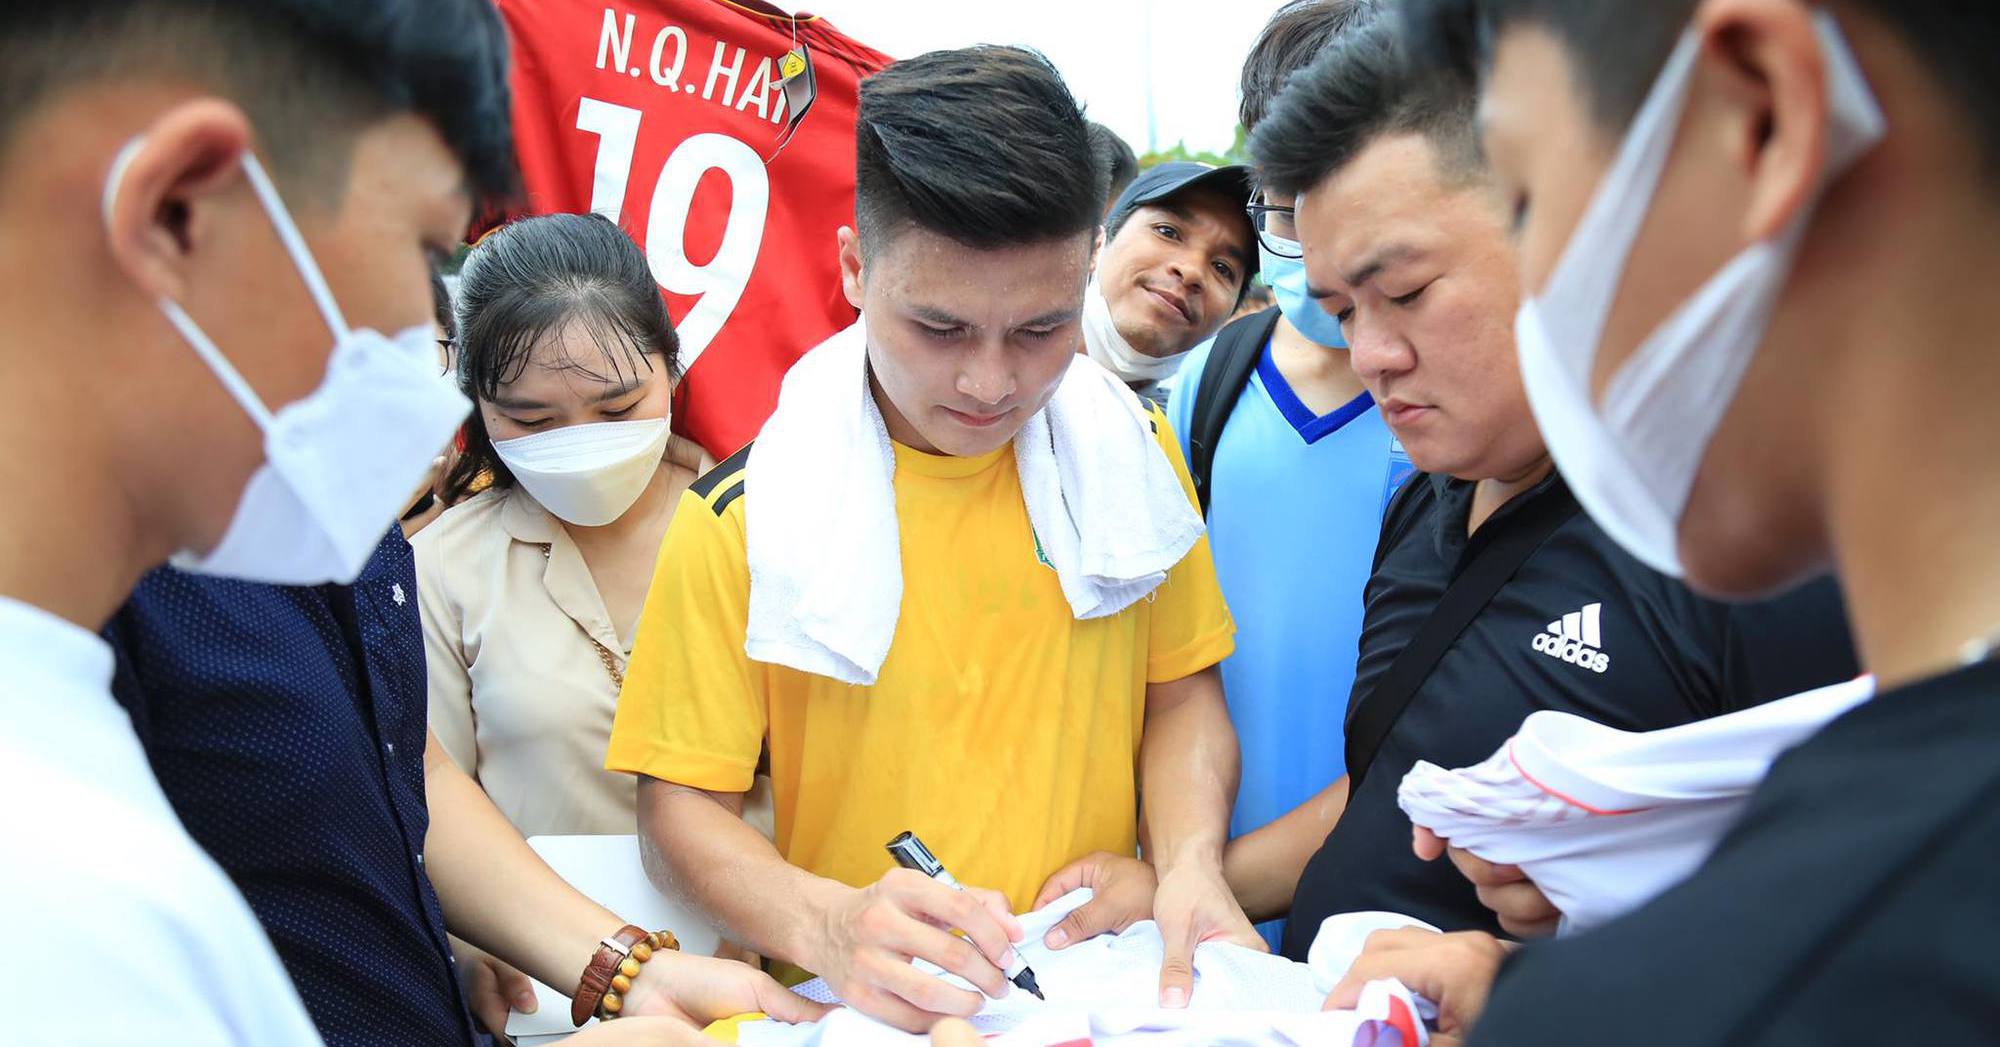 Wearing the shirt of Can Tho club, Quang Hai was surrounded by fans